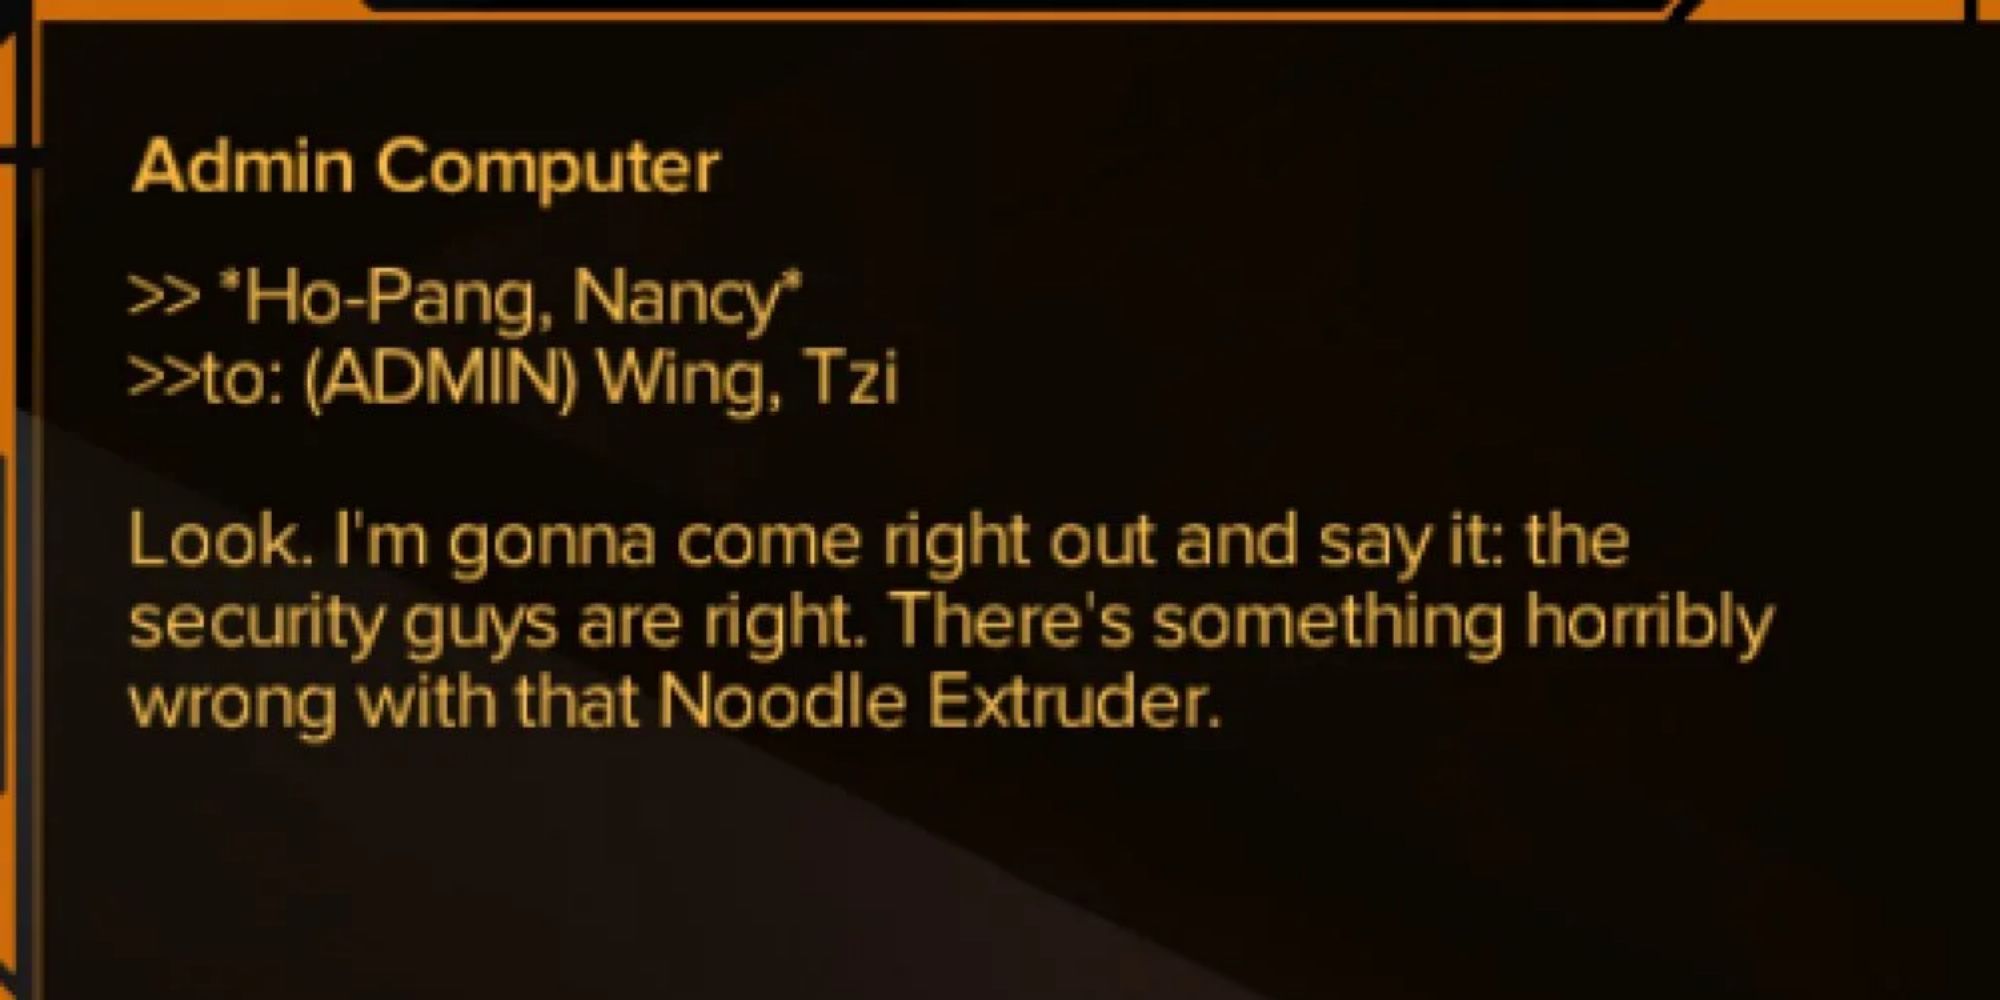 A screenshot from Shadowrun Hong Kong, showing a message to a system admin saying that there is something horribly wrong with the Noodle Extruder